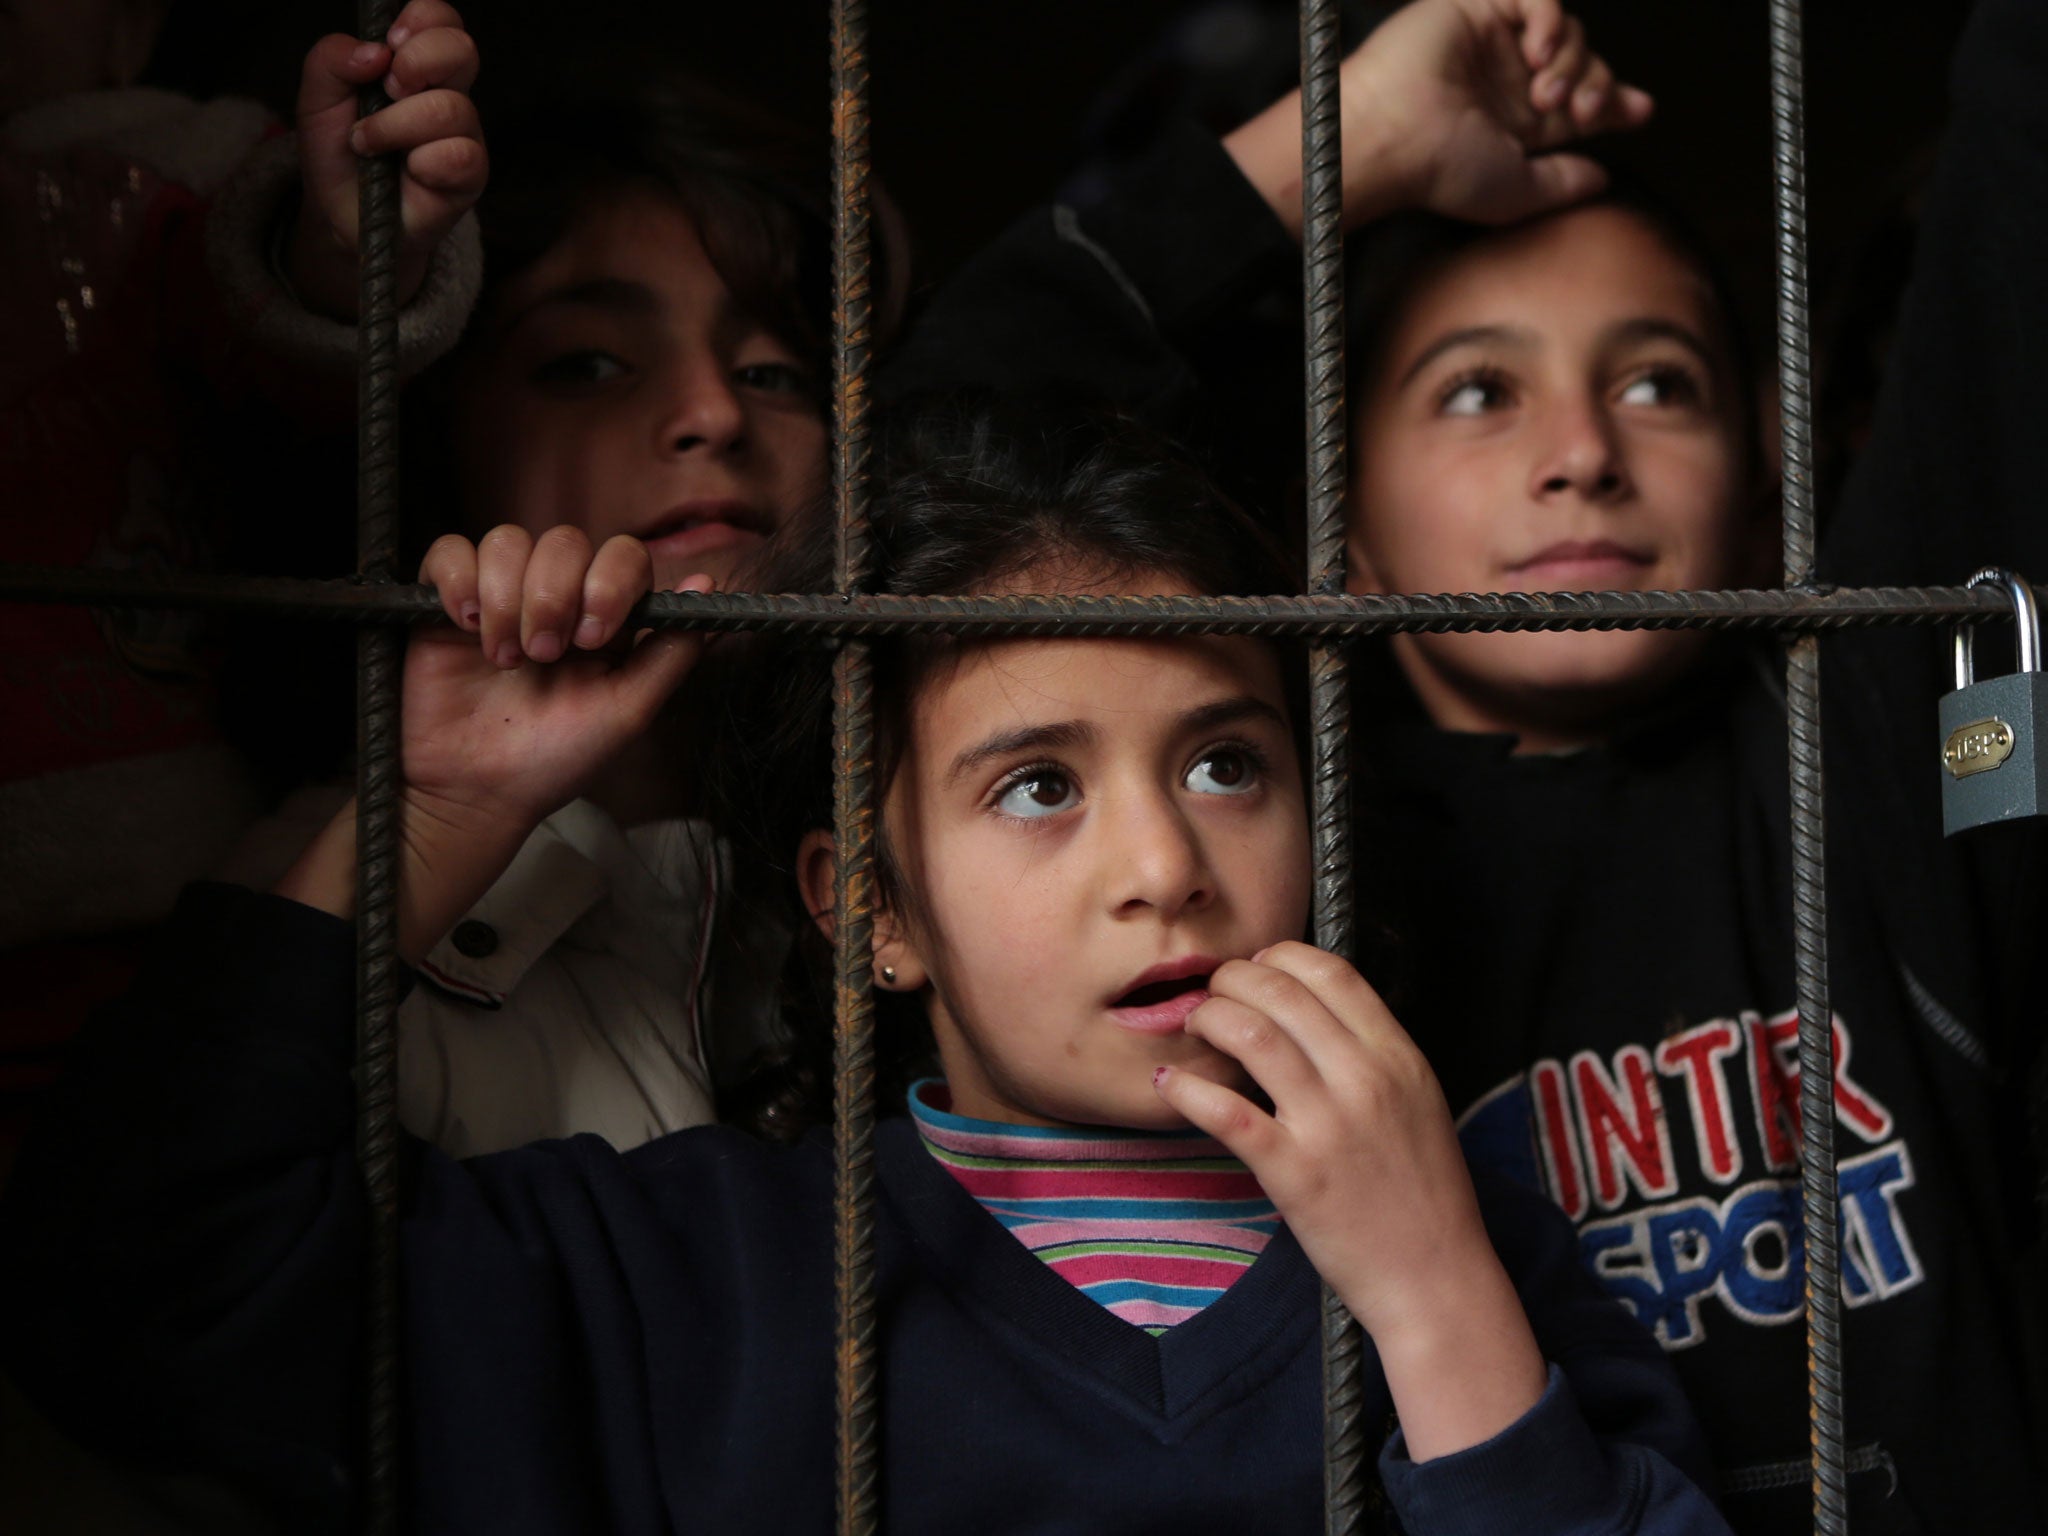 Refugee Syrian children wait for a medical check up in a corridor of newly opened refugee camp in an old school in Sofia, Bulgaria – a gateway to the European Union for migrants fleeing Syria via Turkey